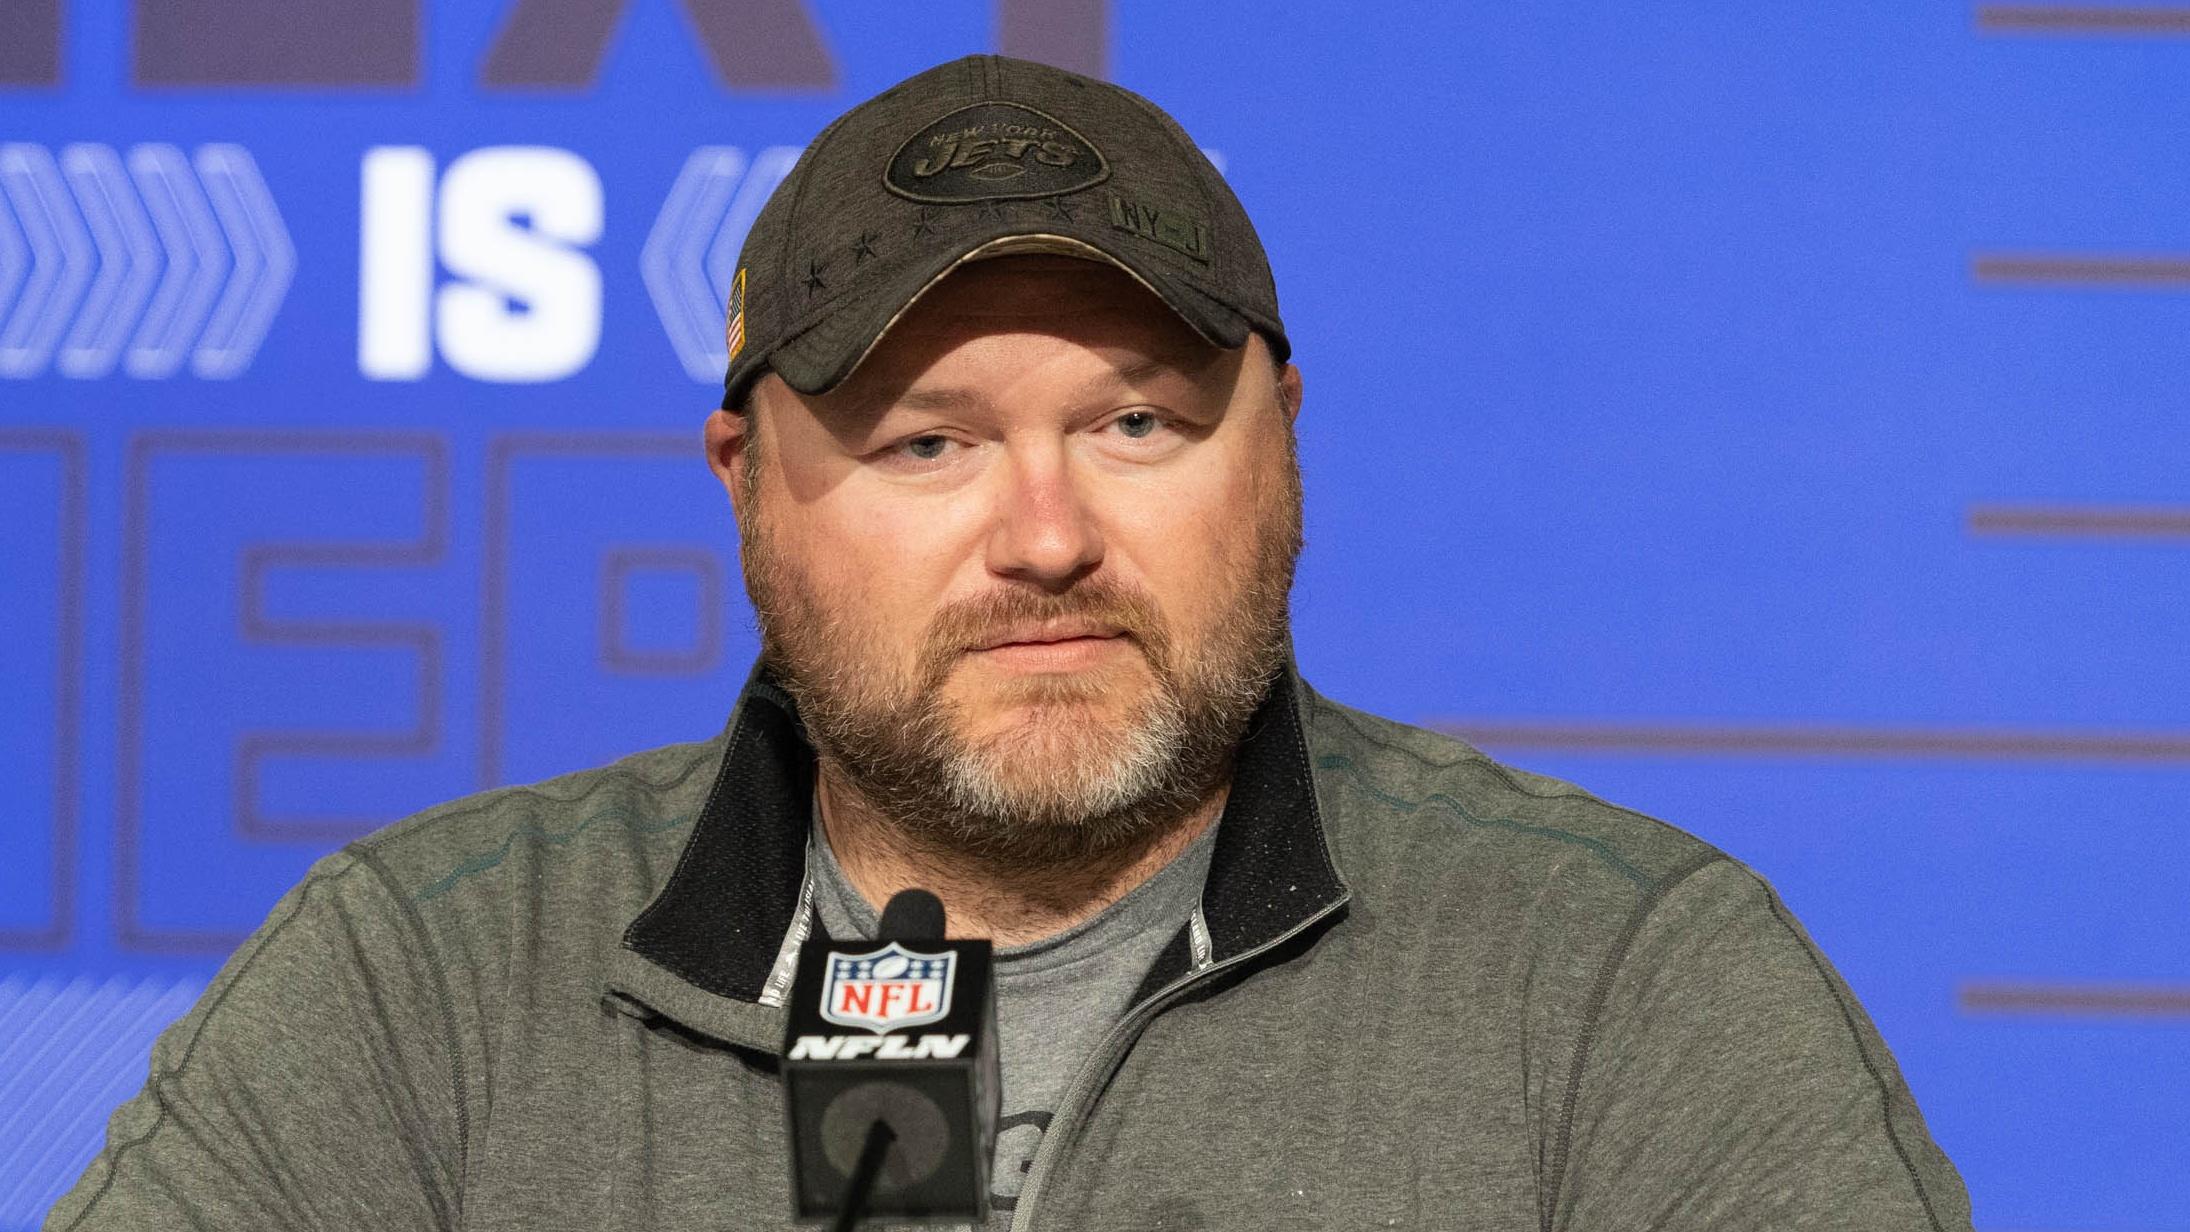 Mar 2, 2022; Indianapolis, IN, USA; New York Jets general manager Joe Douglas talks to the media during the 2022 NFL Combine. Mandatory Credit: Trevor Ruszkowski-USA TODAY Sports / © Trevor Ruszkowski-USA TODAY Sports